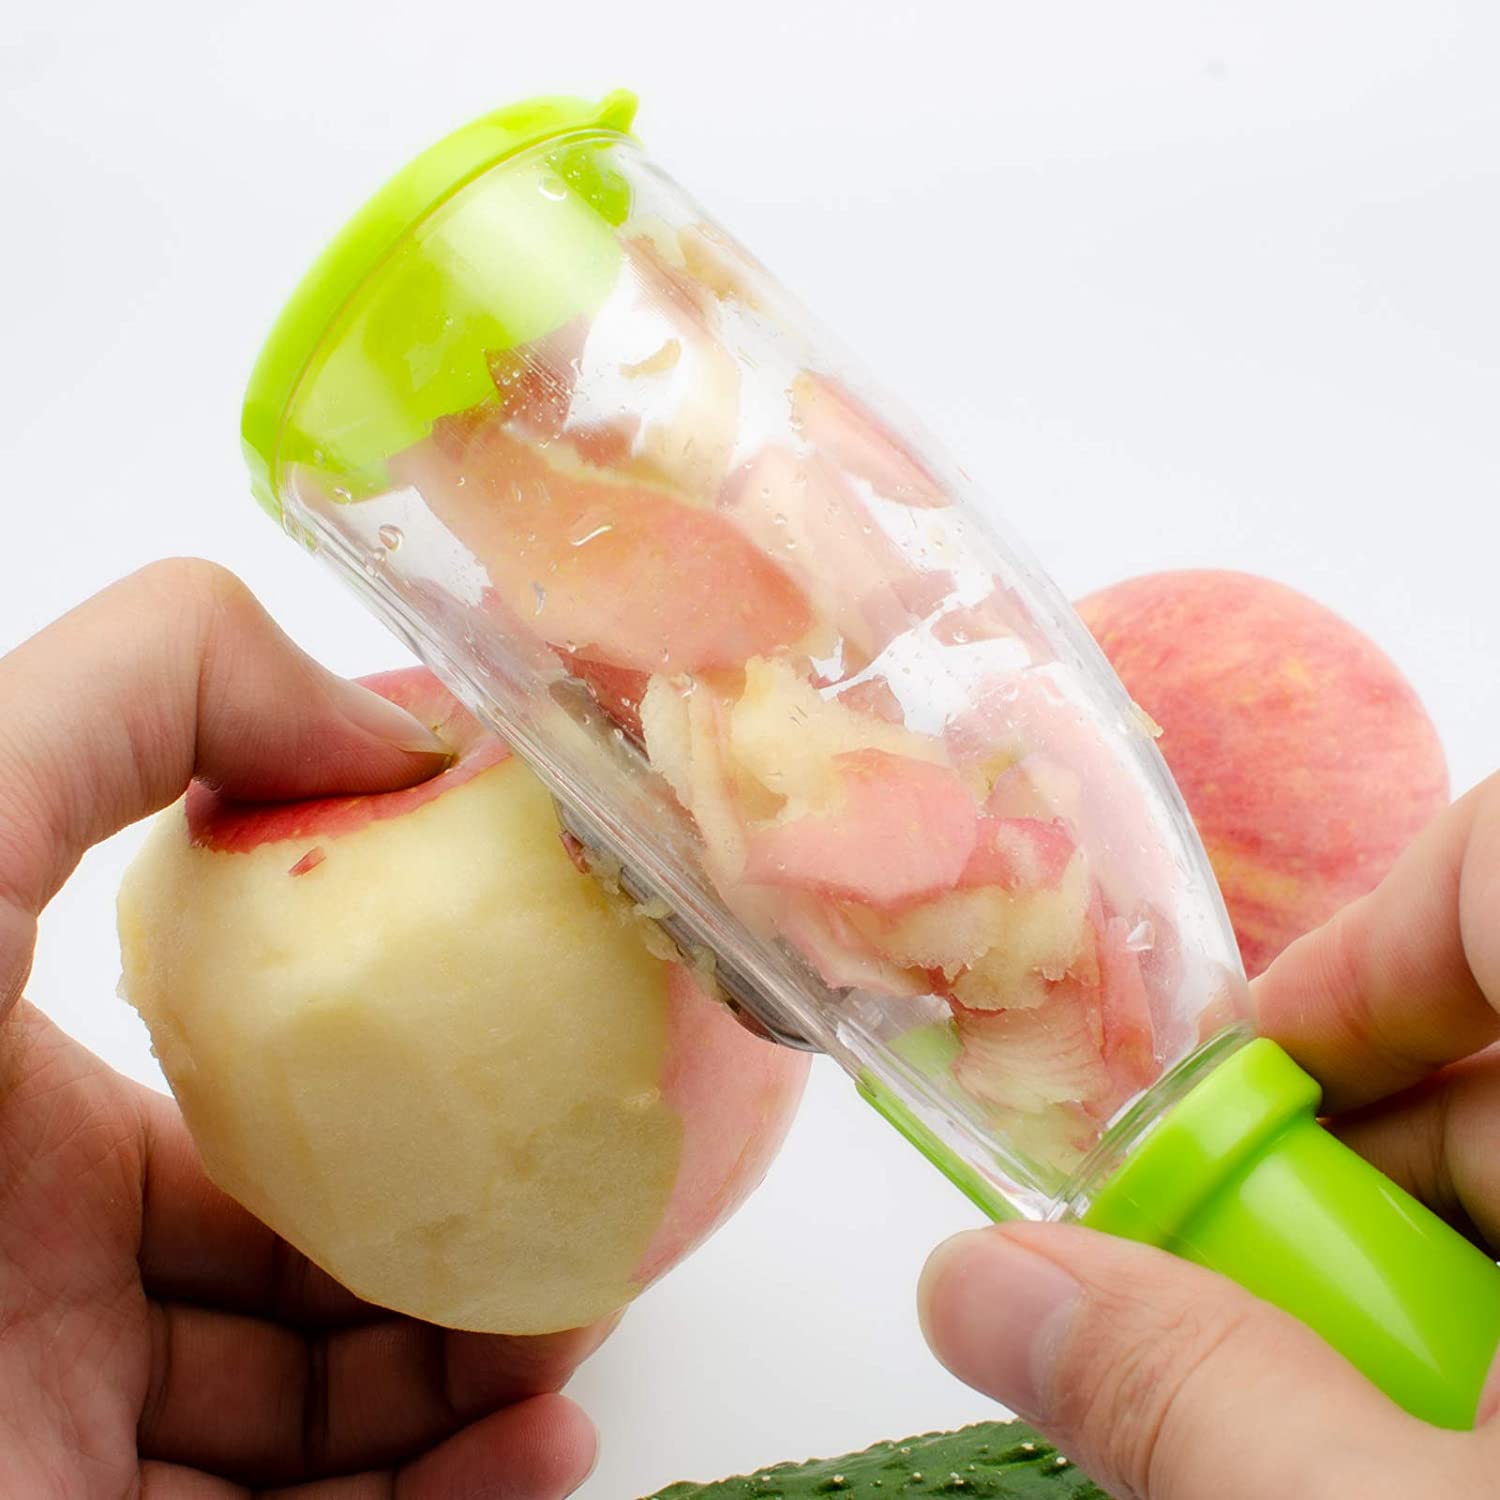 Smart Fruits And Vegetables Peeler, Buy 2 Free Shipping